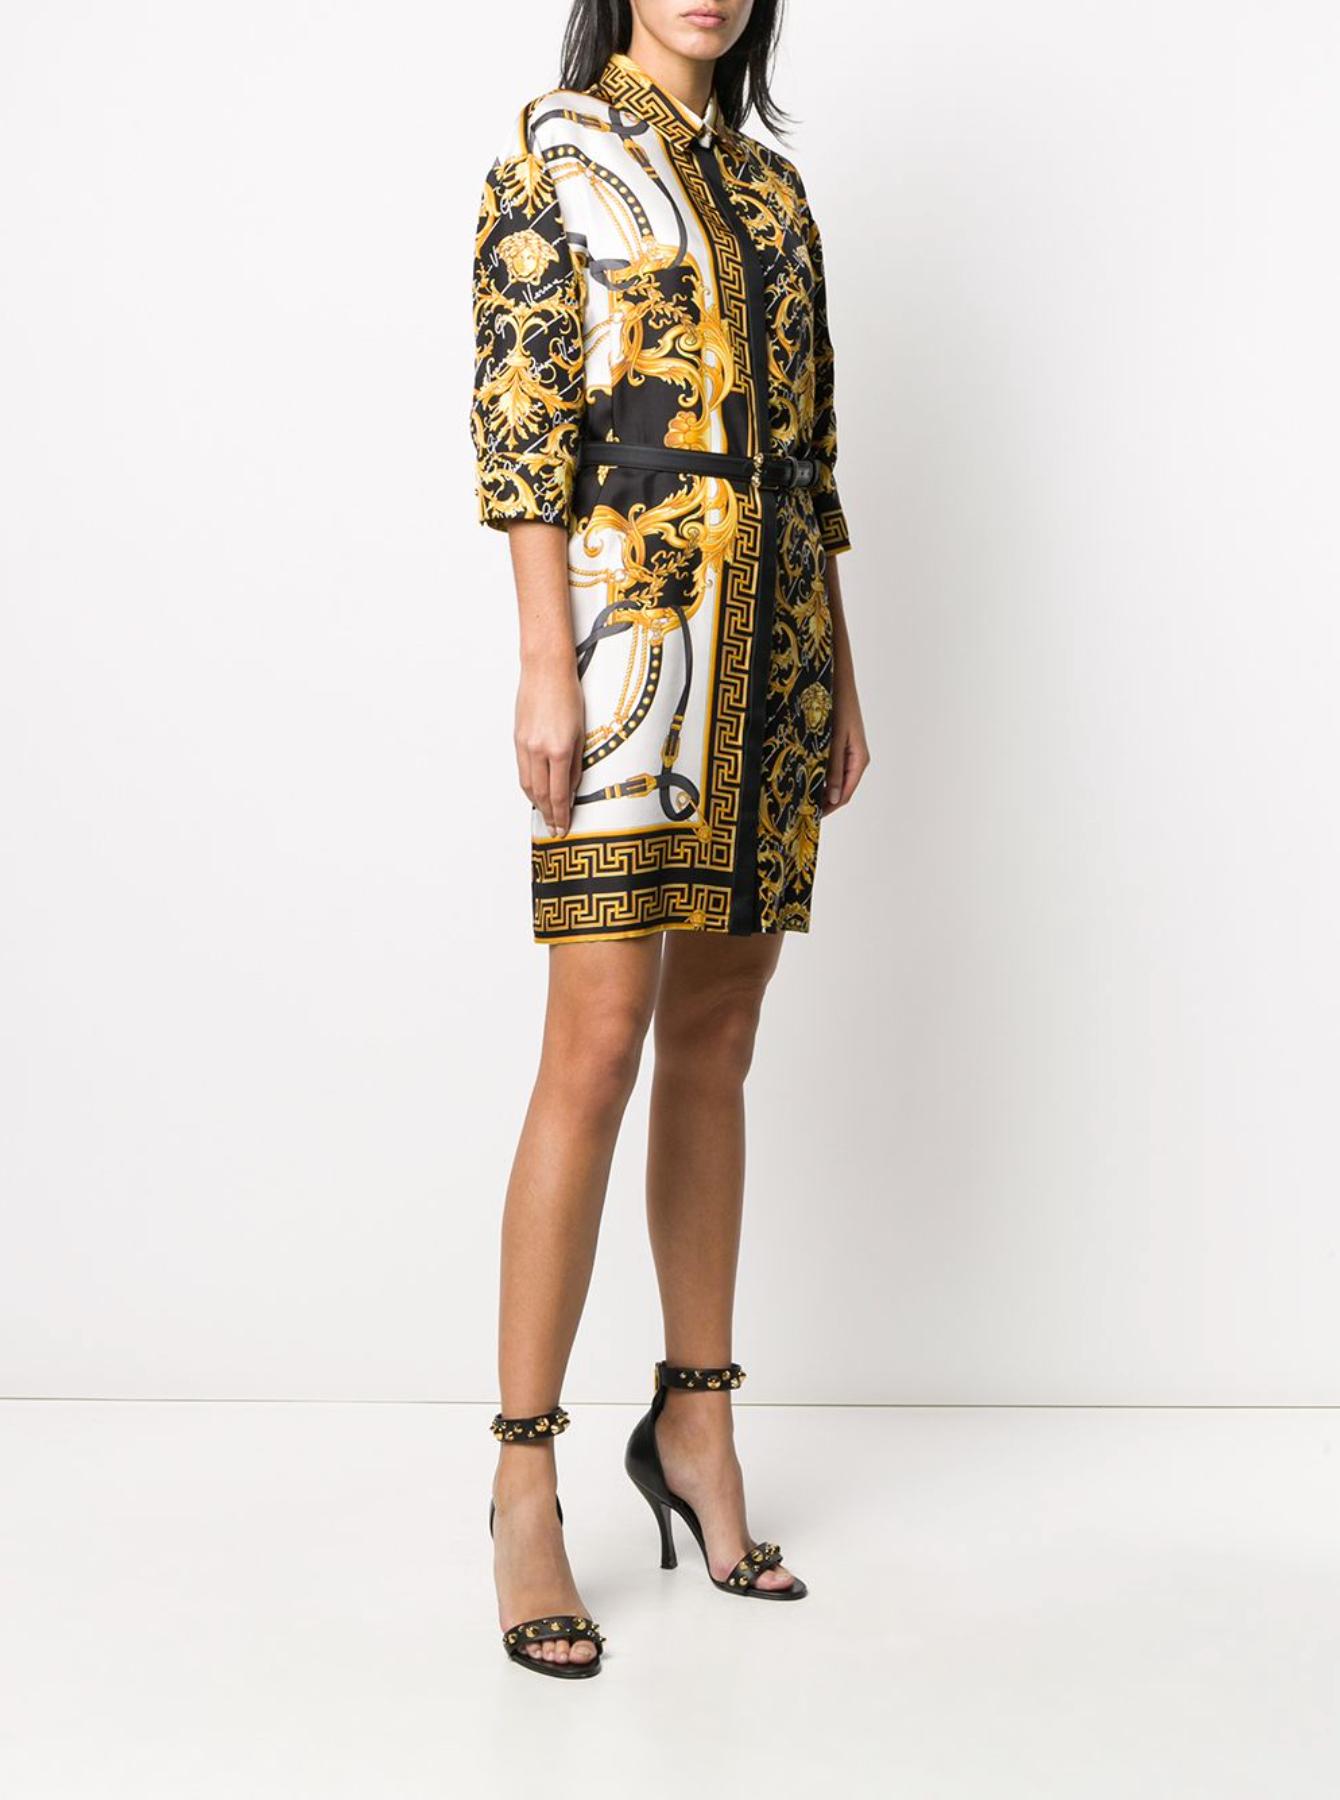 Versace Signature Barocco Silk Fitted Button Down Shirt Dress with Belt

This Barocco Signature Print Shirt Dress with Barocco Rodeo print insert features a classic collar, concealed front button fastening, 3/4 sleeves, black leather waist belt,